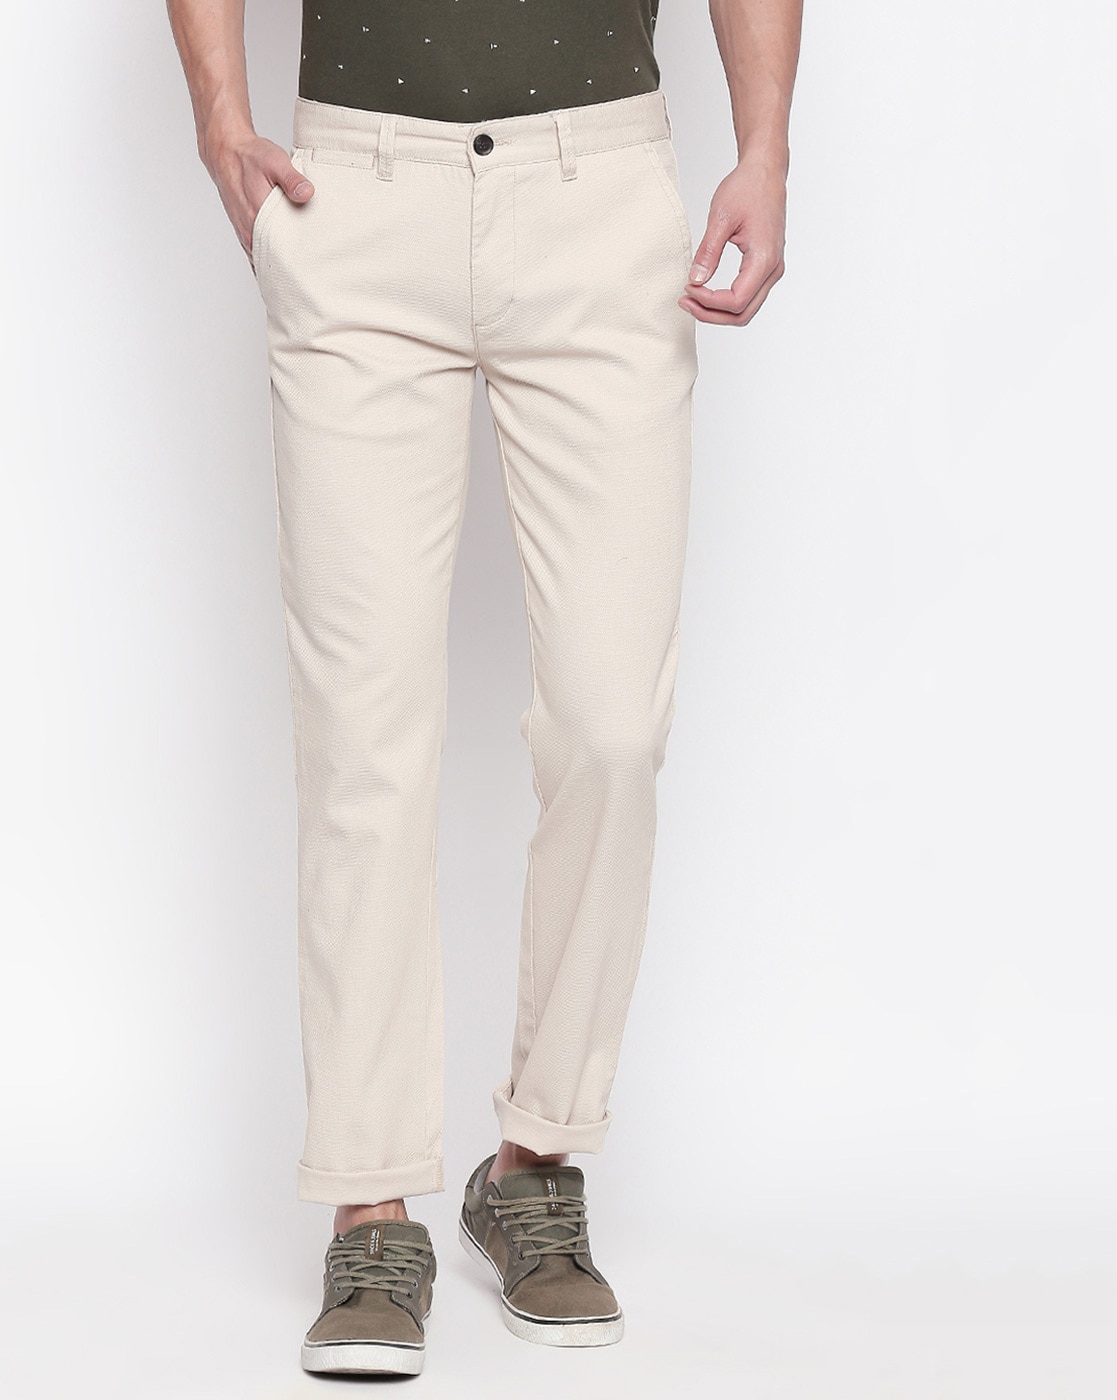 Buy Byford by Pantaloons Men Brown Solid Slim fit Regular trousers Online  at Low Prices in India - Paytmmall.com